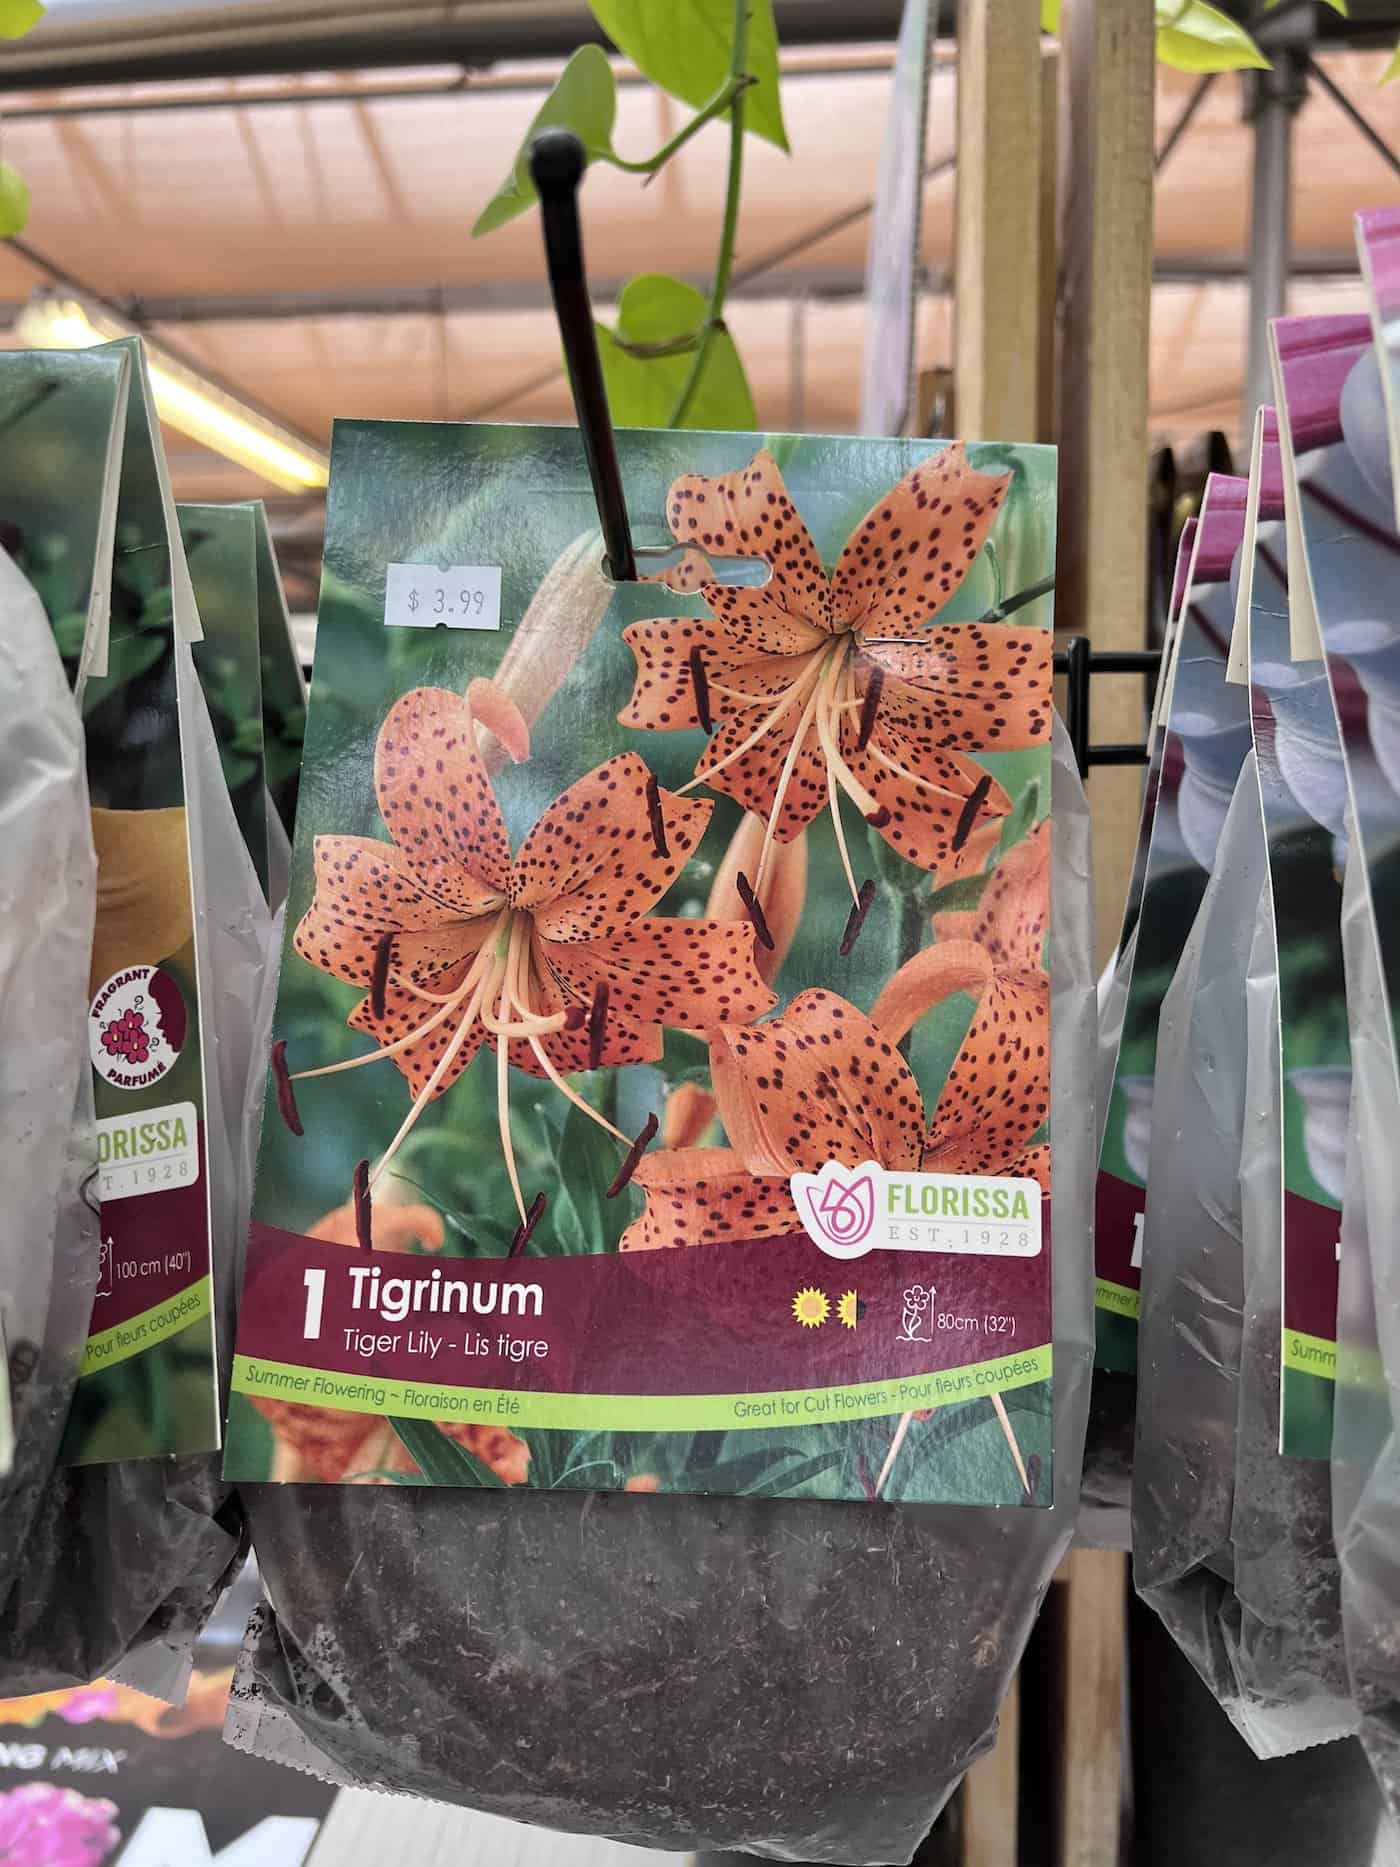 Tiger lily bulbs for sale